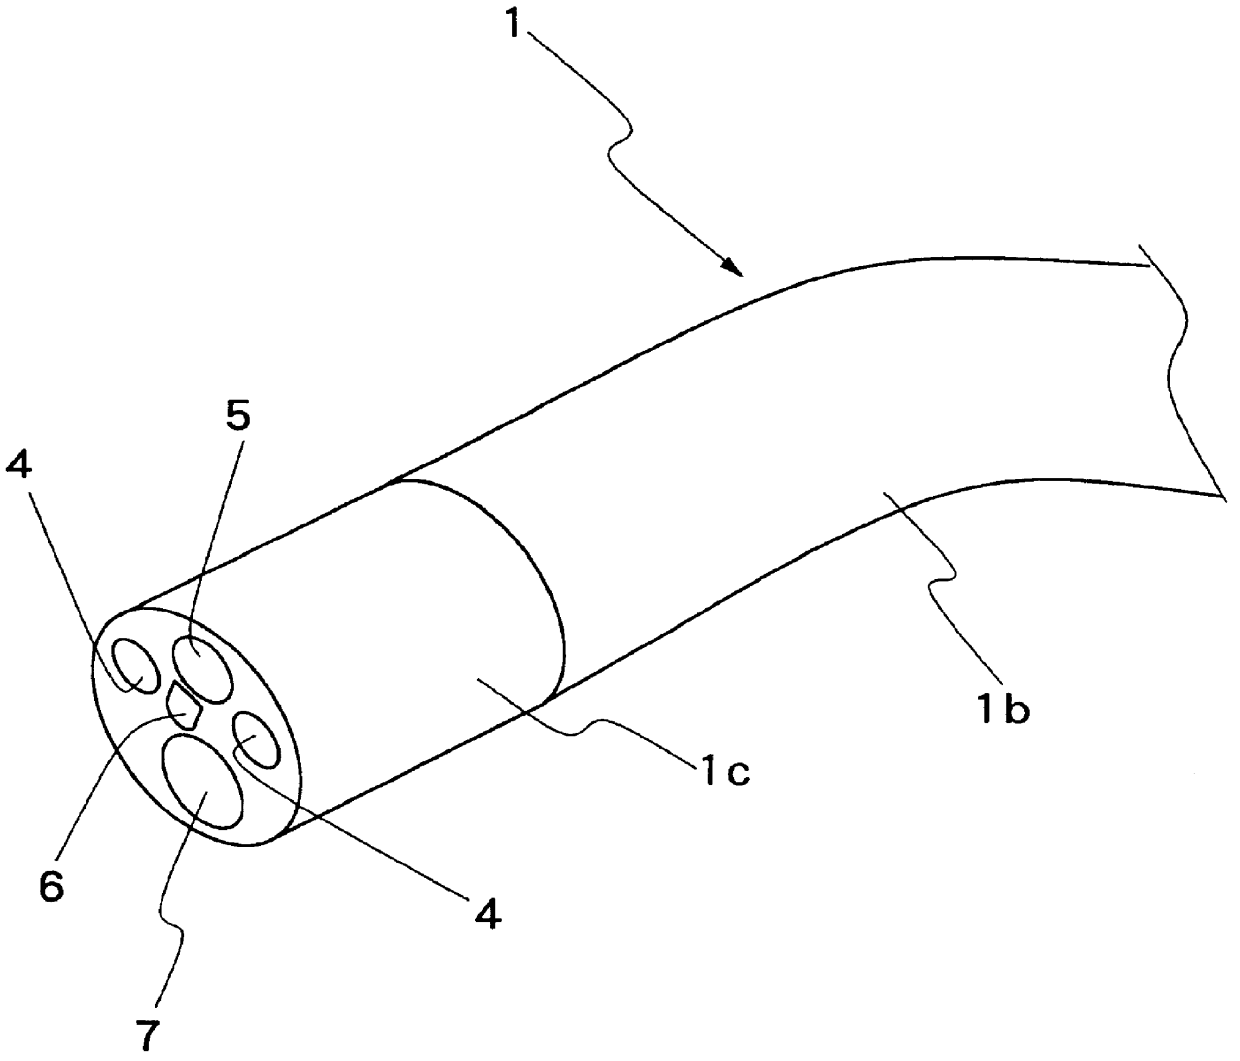 Plug device for endoscopic instrument channel